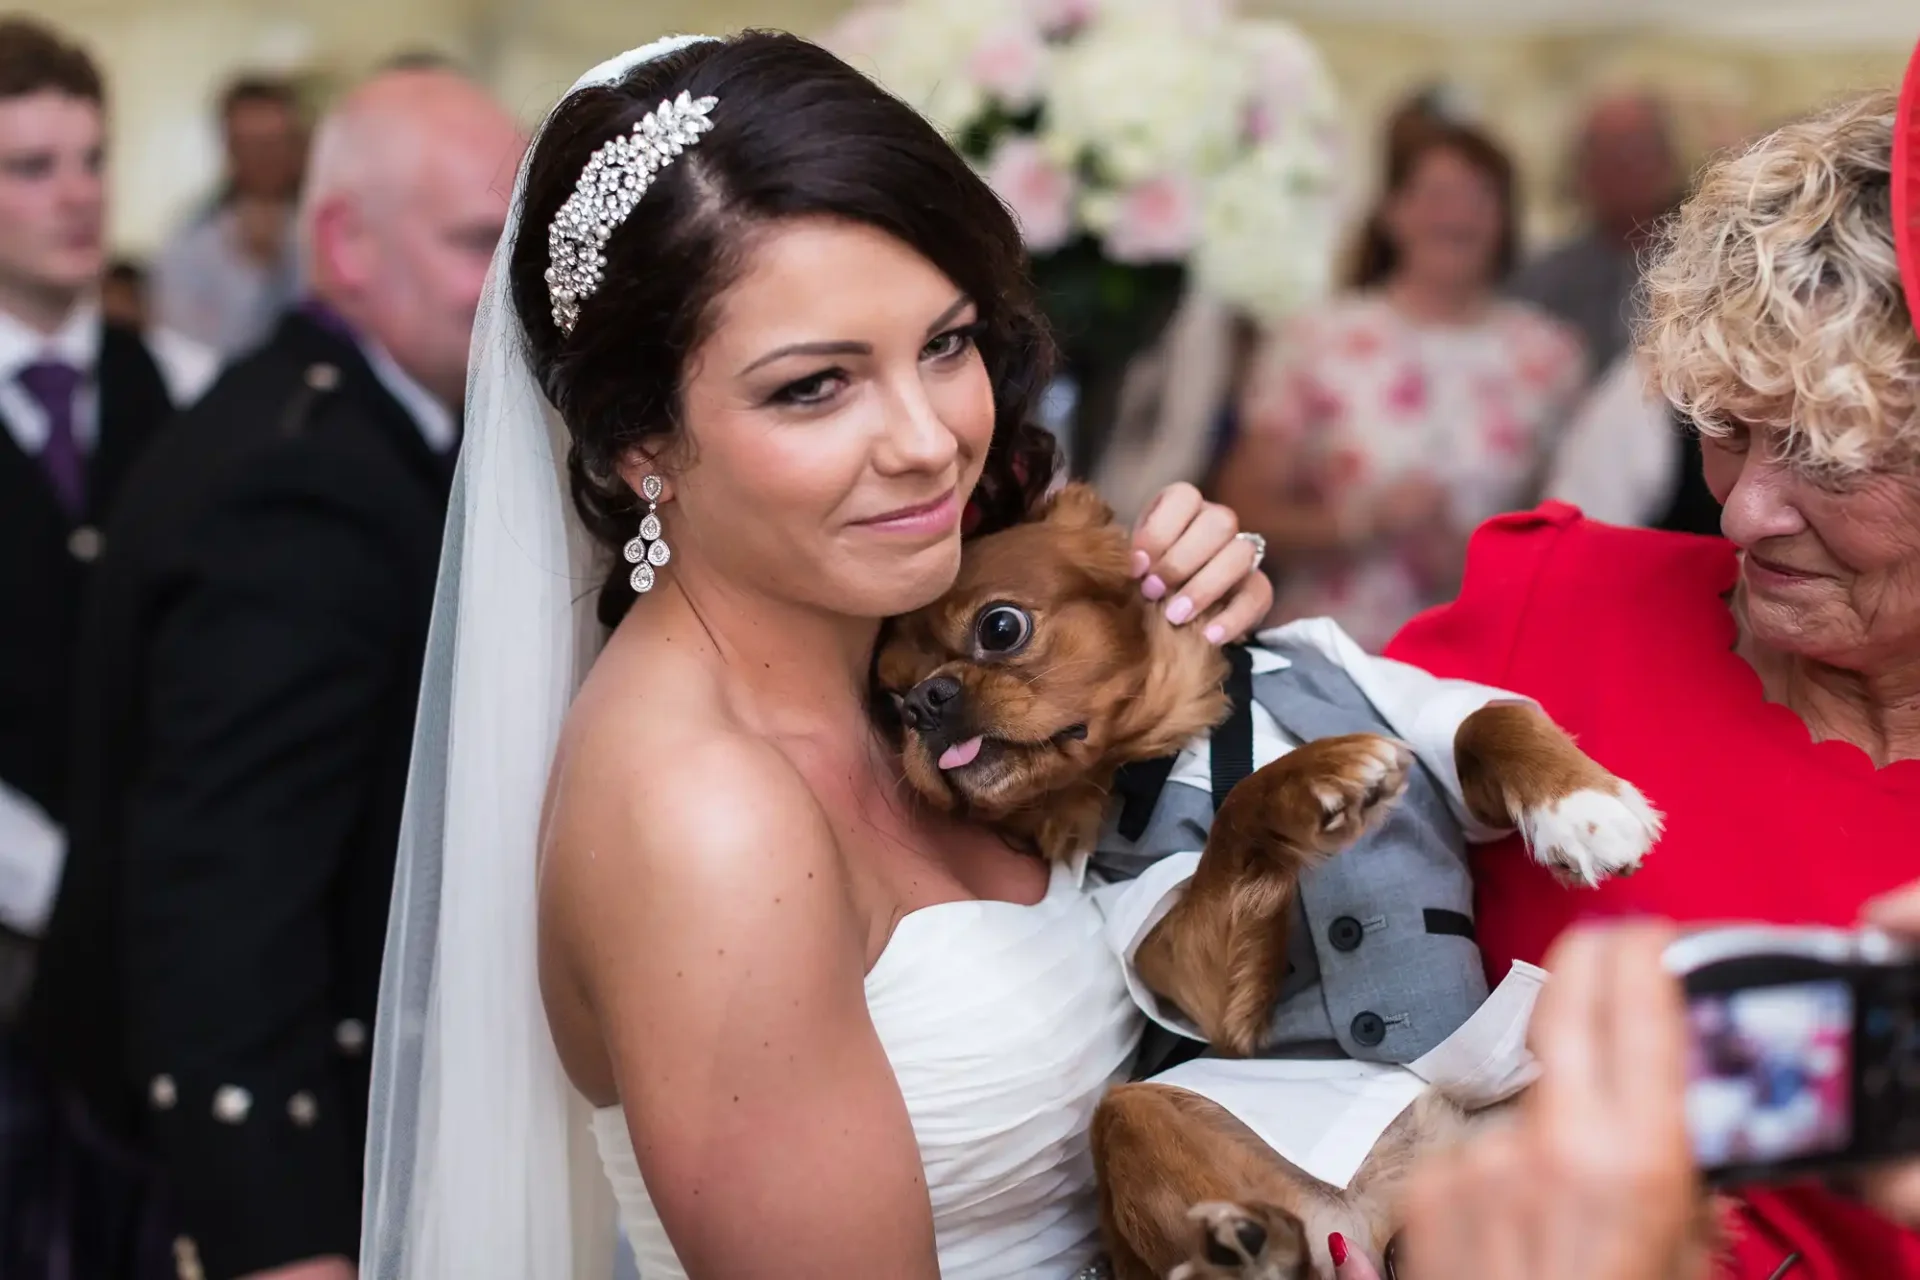 A bride holding a small brown dog smiles during a wedding reception as an elderly woman assists and guests watch.